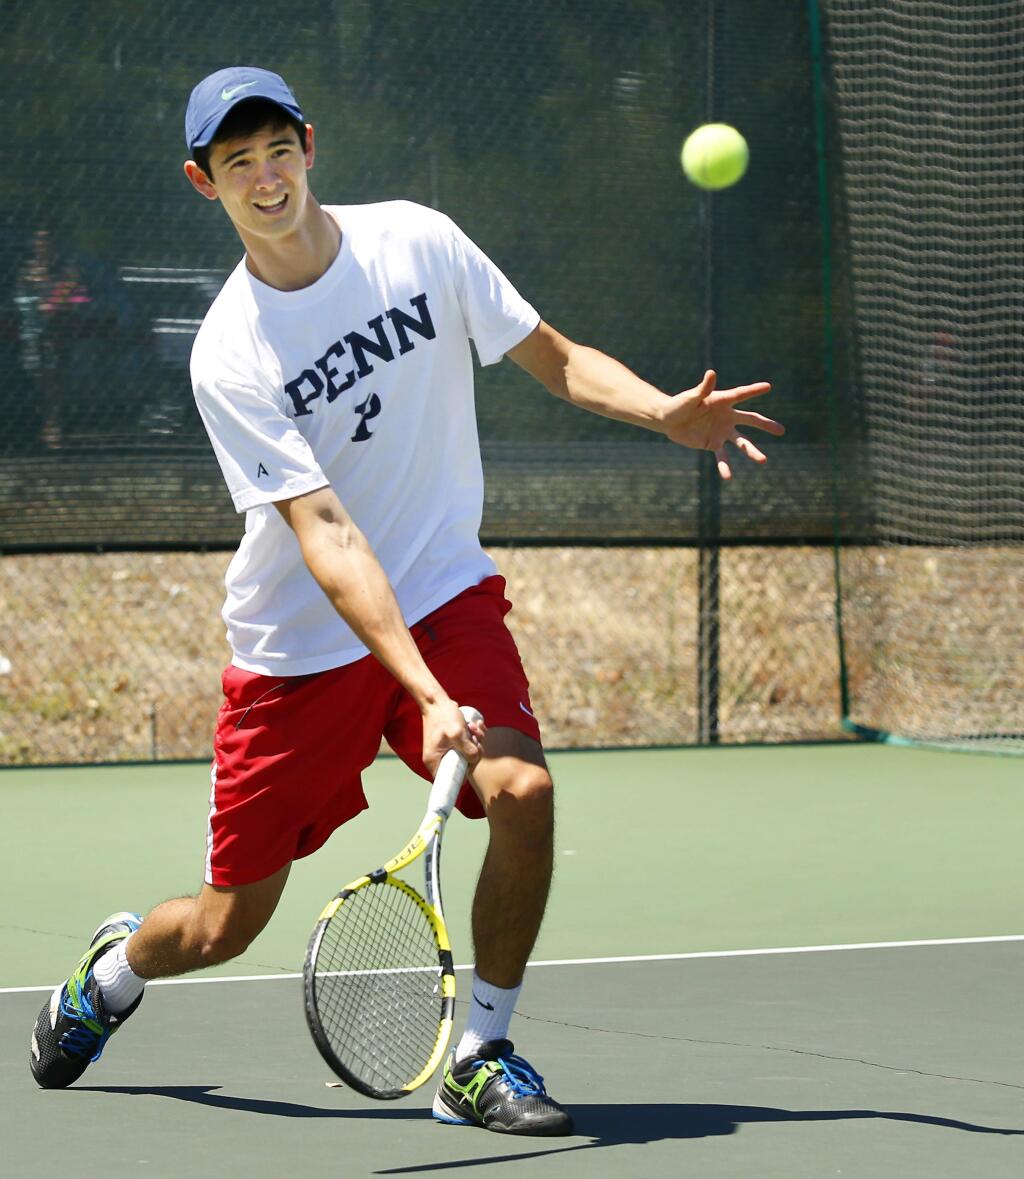 Matthew Payne practices tennis at La Cantera Racquet and Swim Club in Santa Rosa on Wednesday, July 9, 2014. (Conner Jay/The Press Democrat)